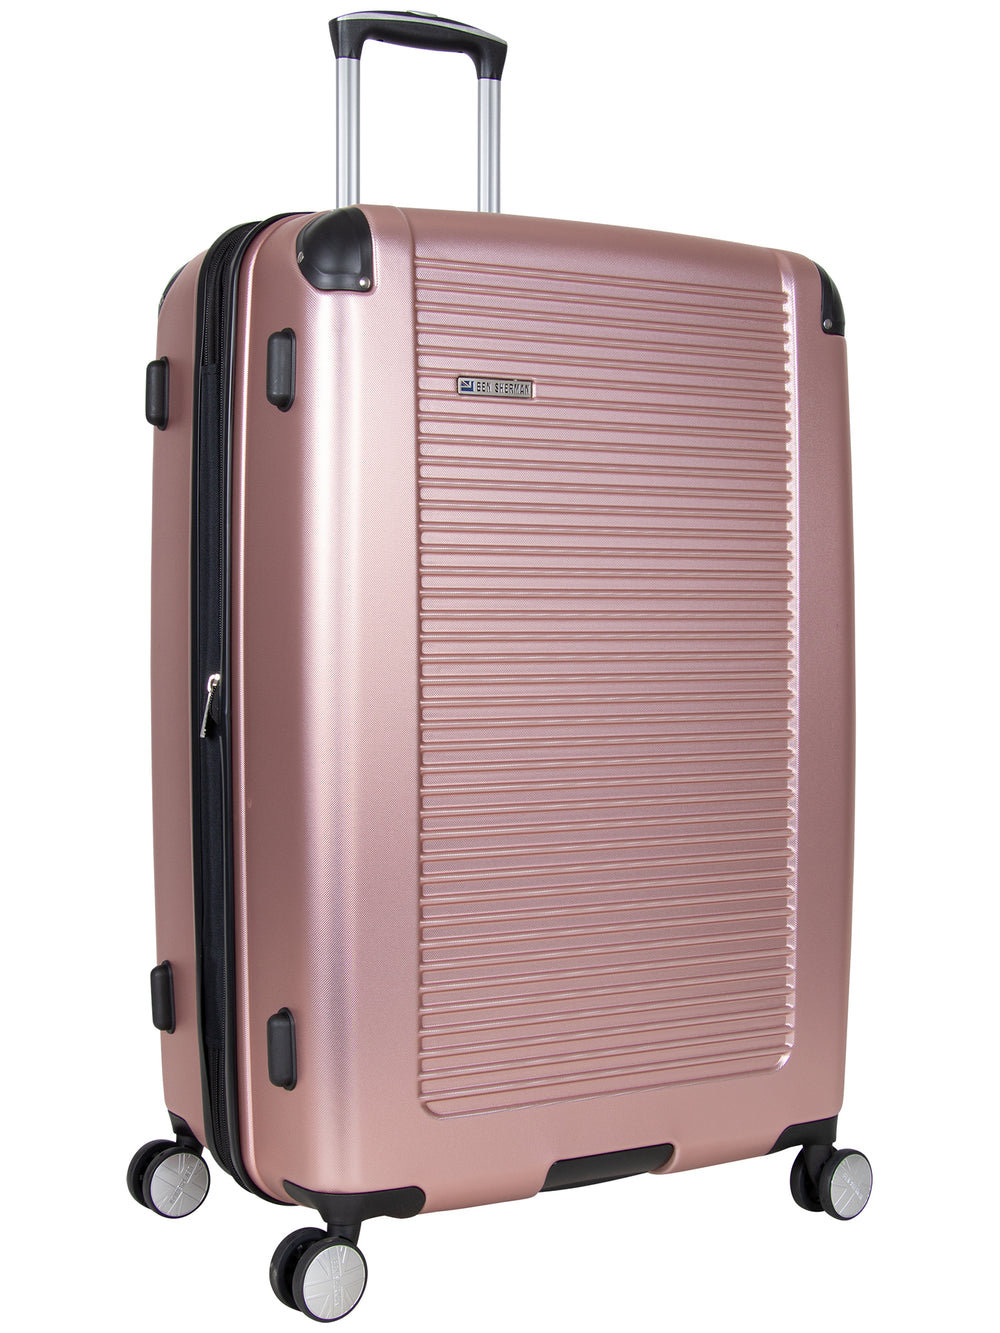 Norwich 3-Piece Expandable Hardside Luggage Collection - Rose Gold